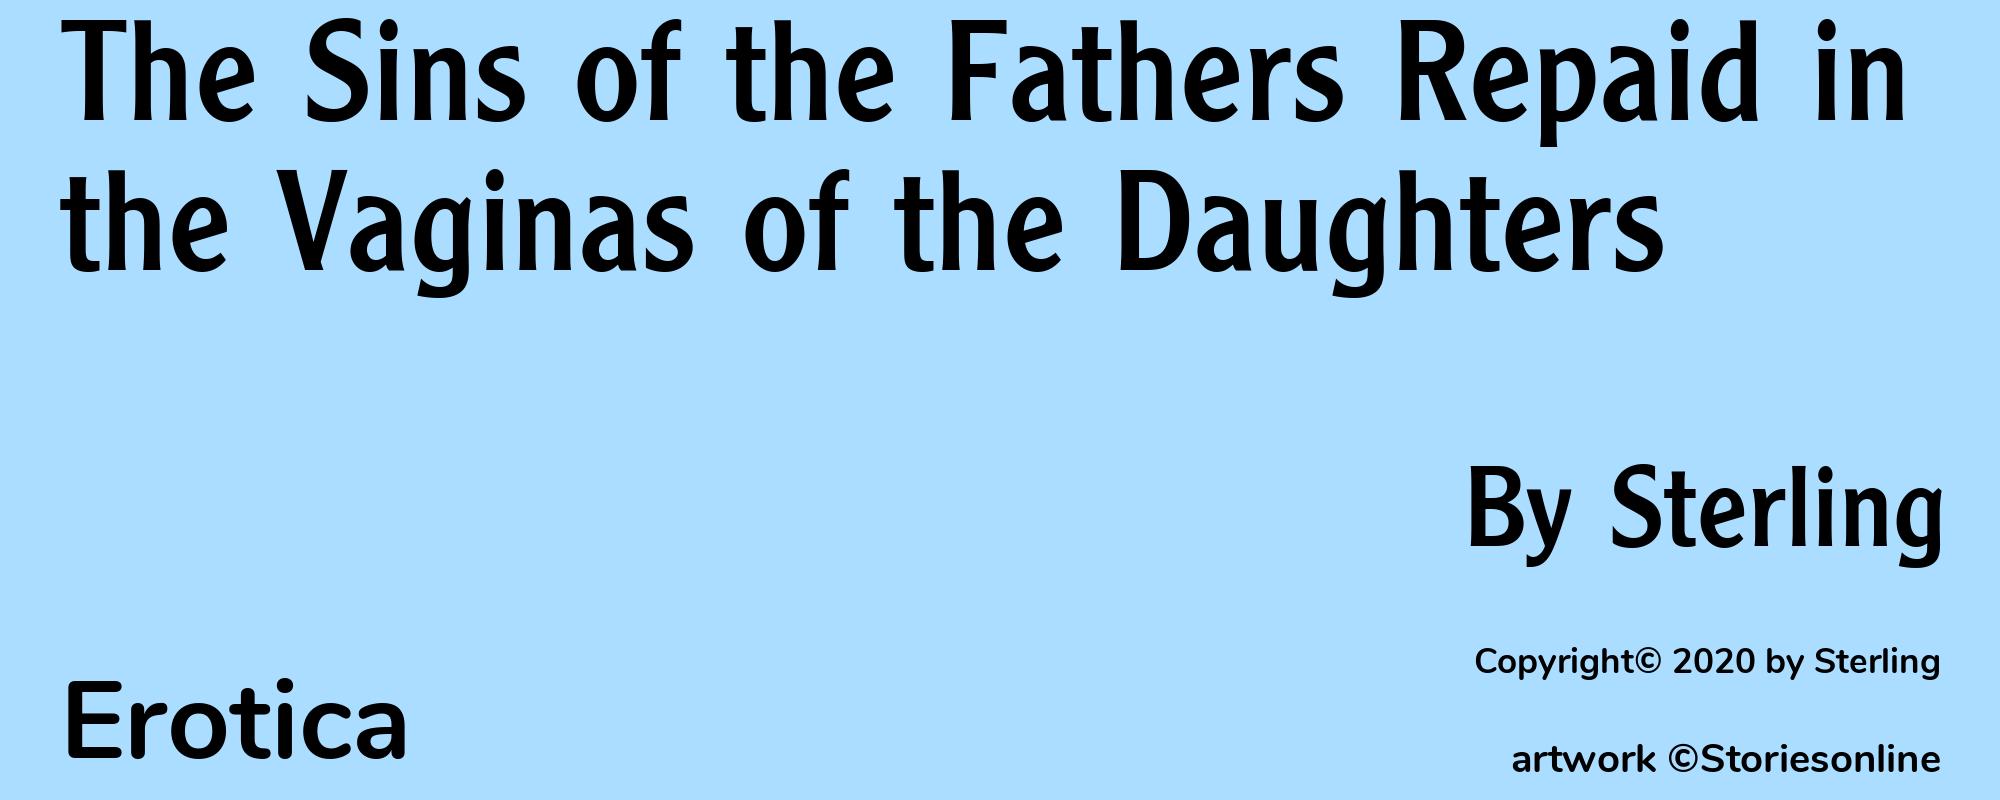 The Sins of the Fathers Repaid in the Vaginas of the Daughters - Cover